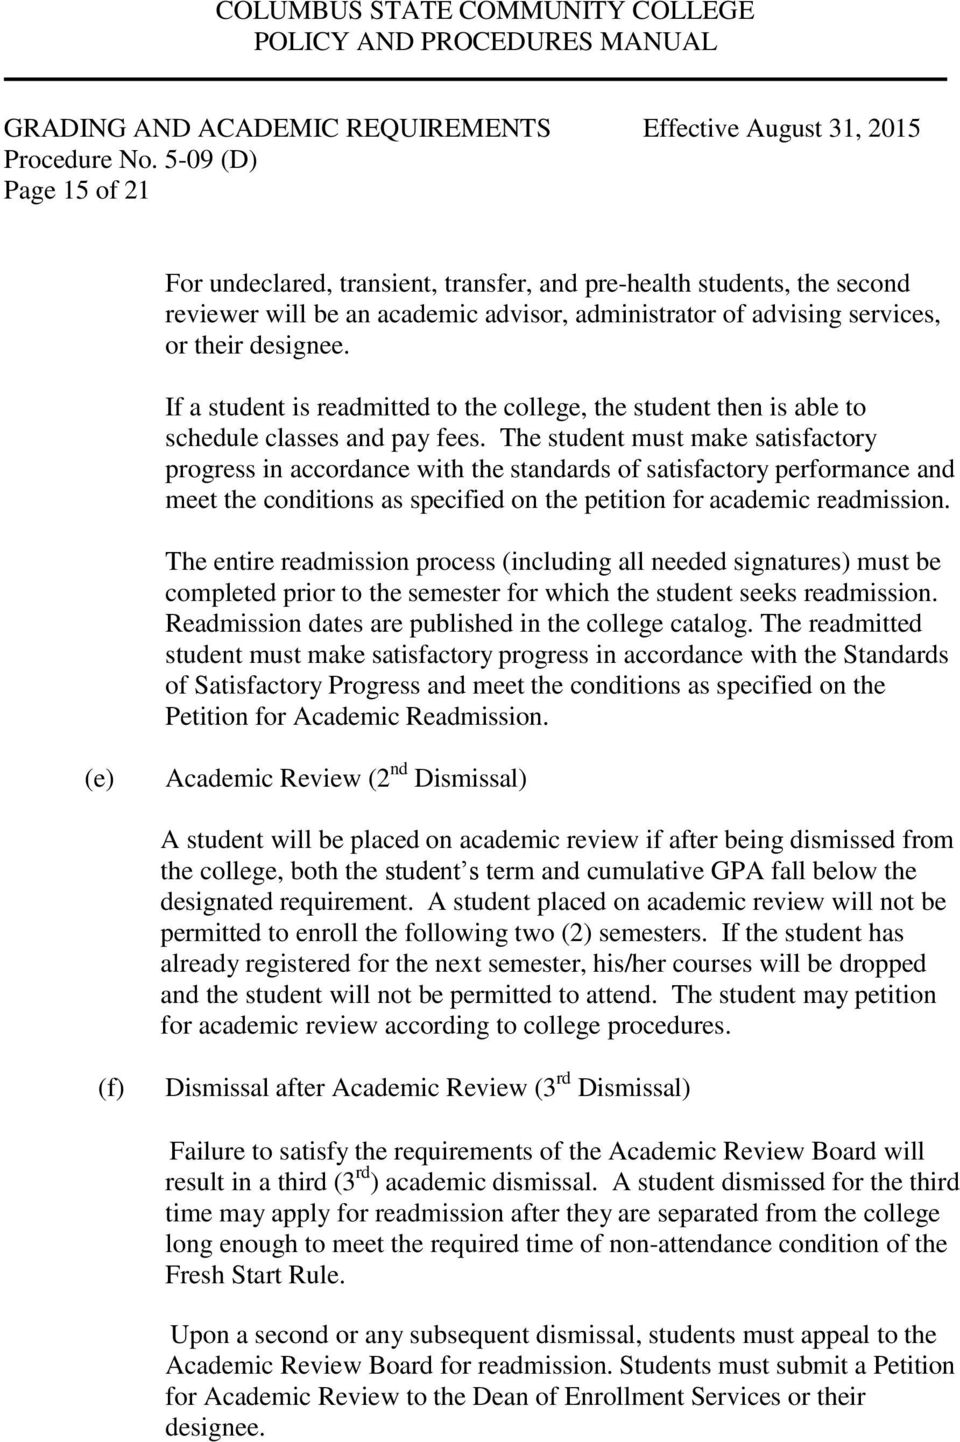 The student must make satisfactory progress in accordance with the standards of satisfactory performance and meet the conditions as specified on the petition for academic readmission.